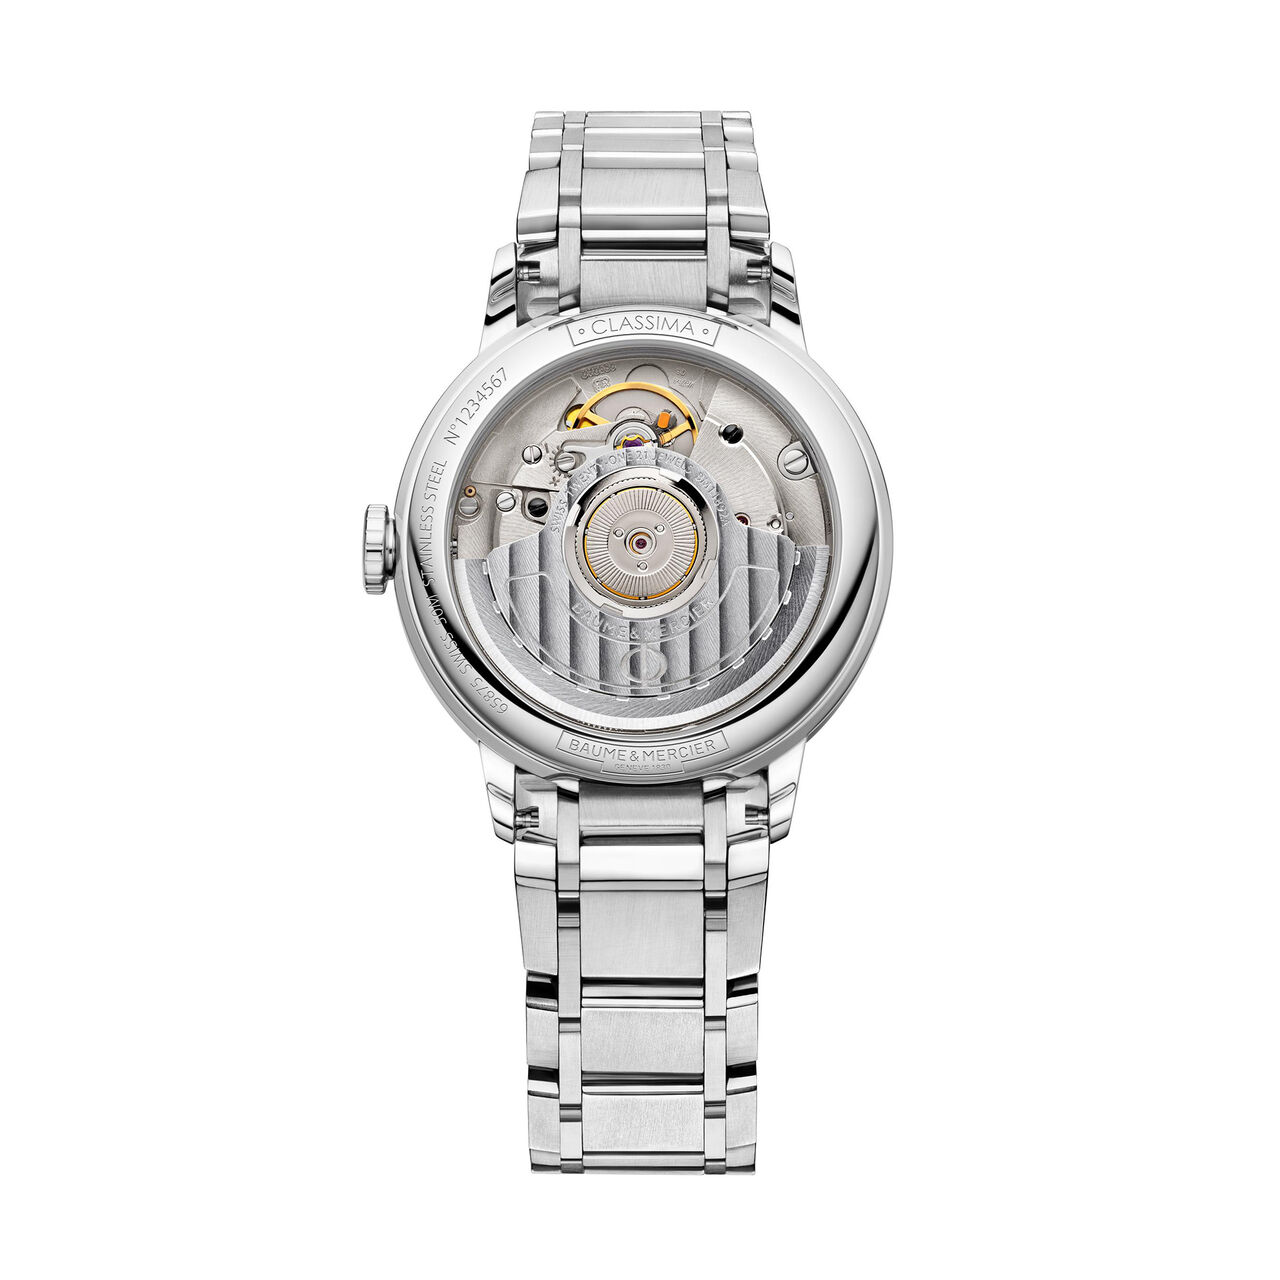 Classima Automatic 34 mm Stainless Steel & Diamond image number 1